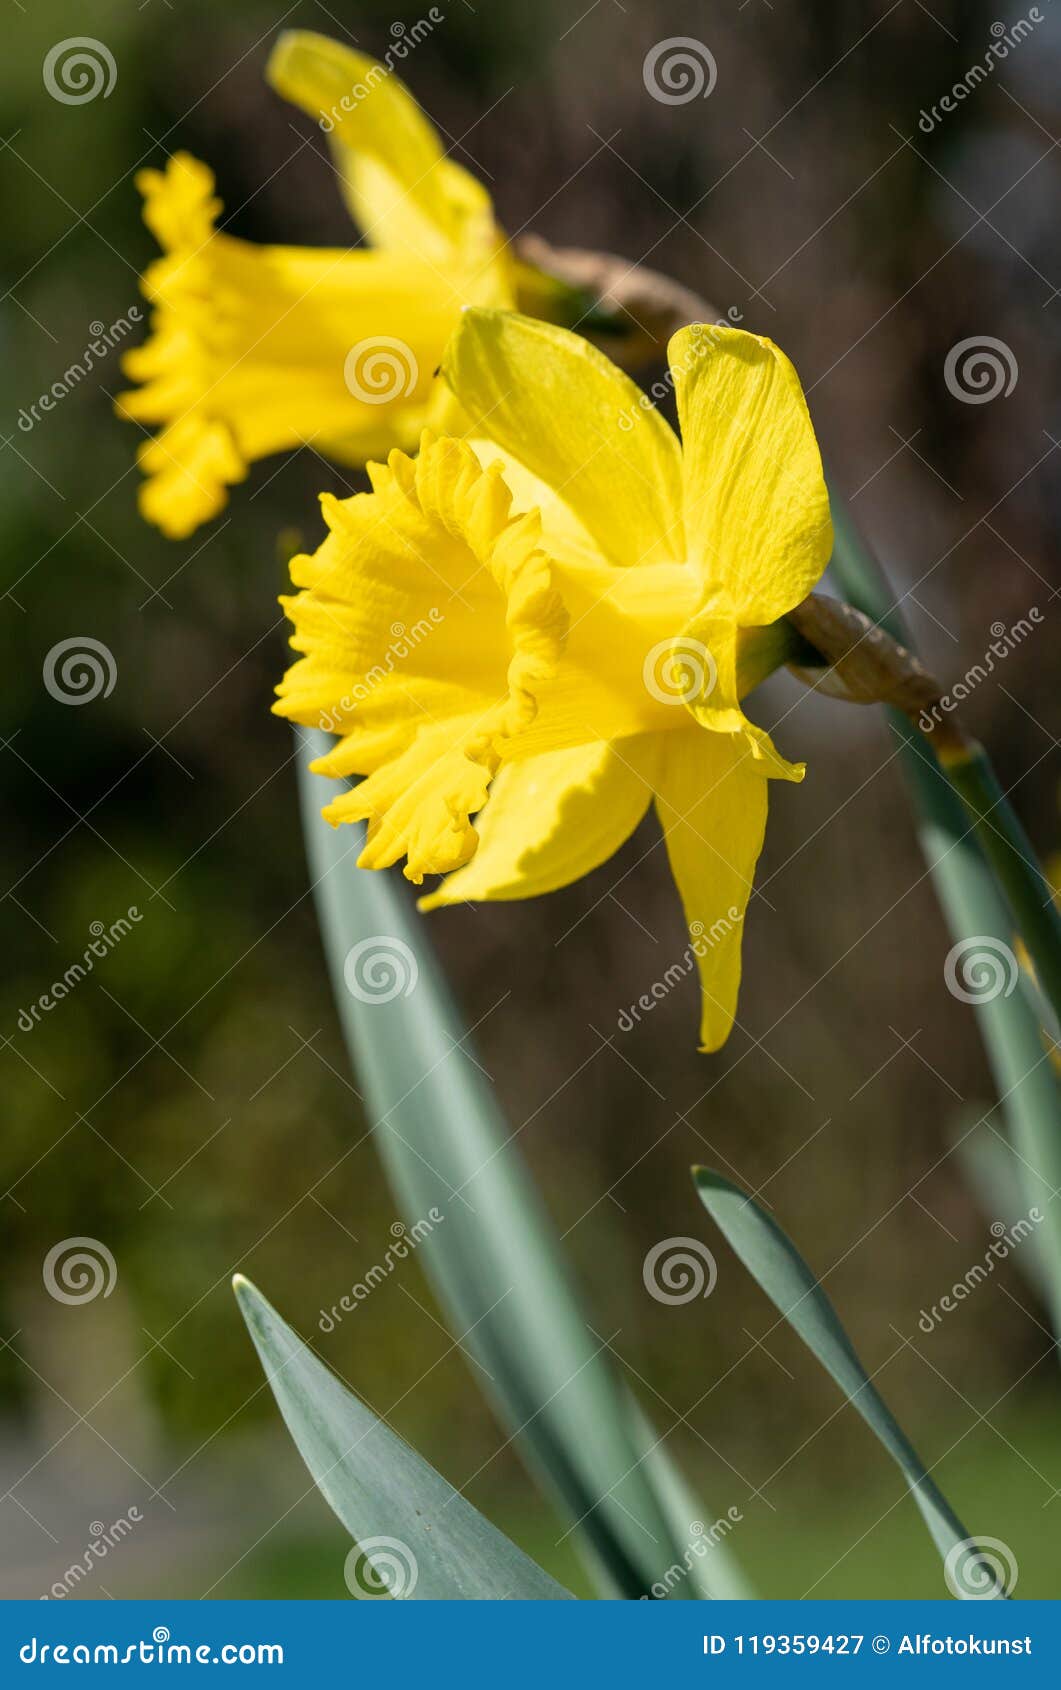 Daffodil, Narcissus Pseudonarcissus Stock Image - Image of blooming ...